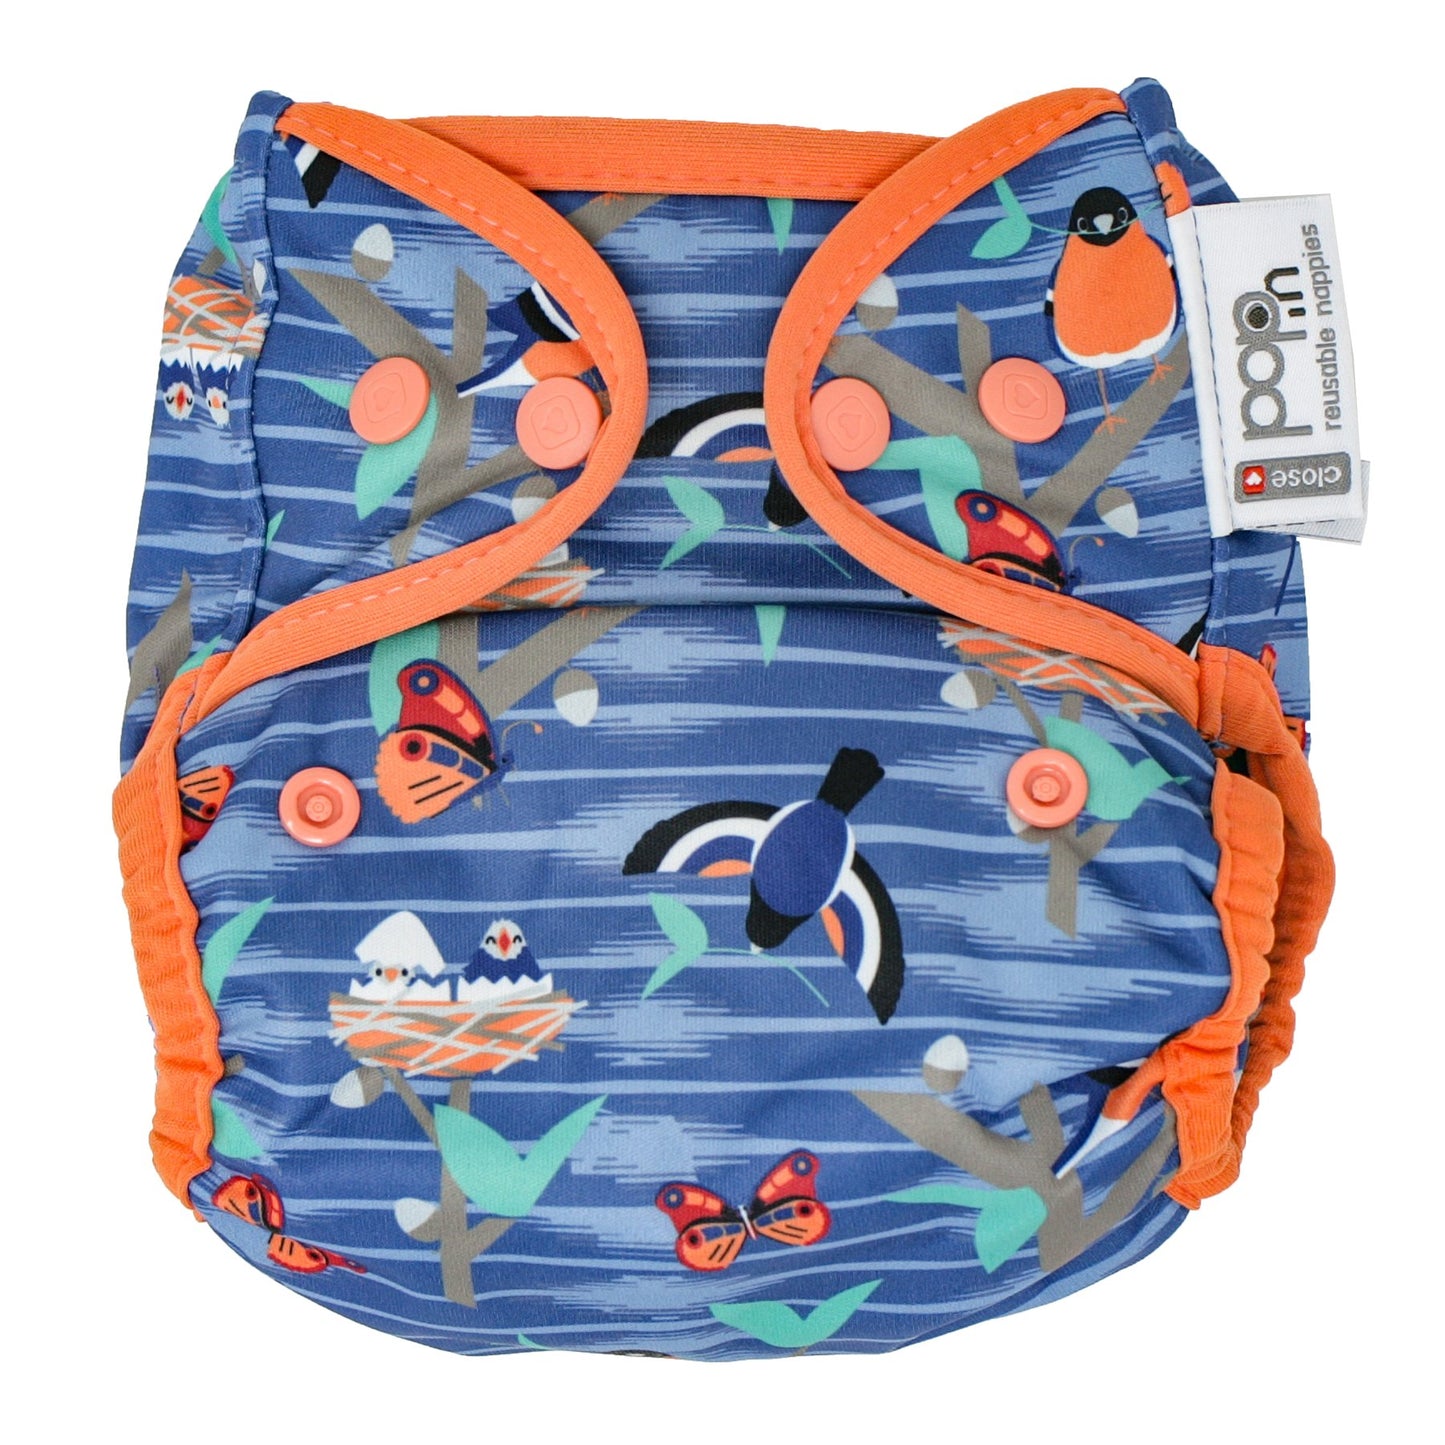 Pop-in Single Printed Reusable Popper Nappy +bamboo